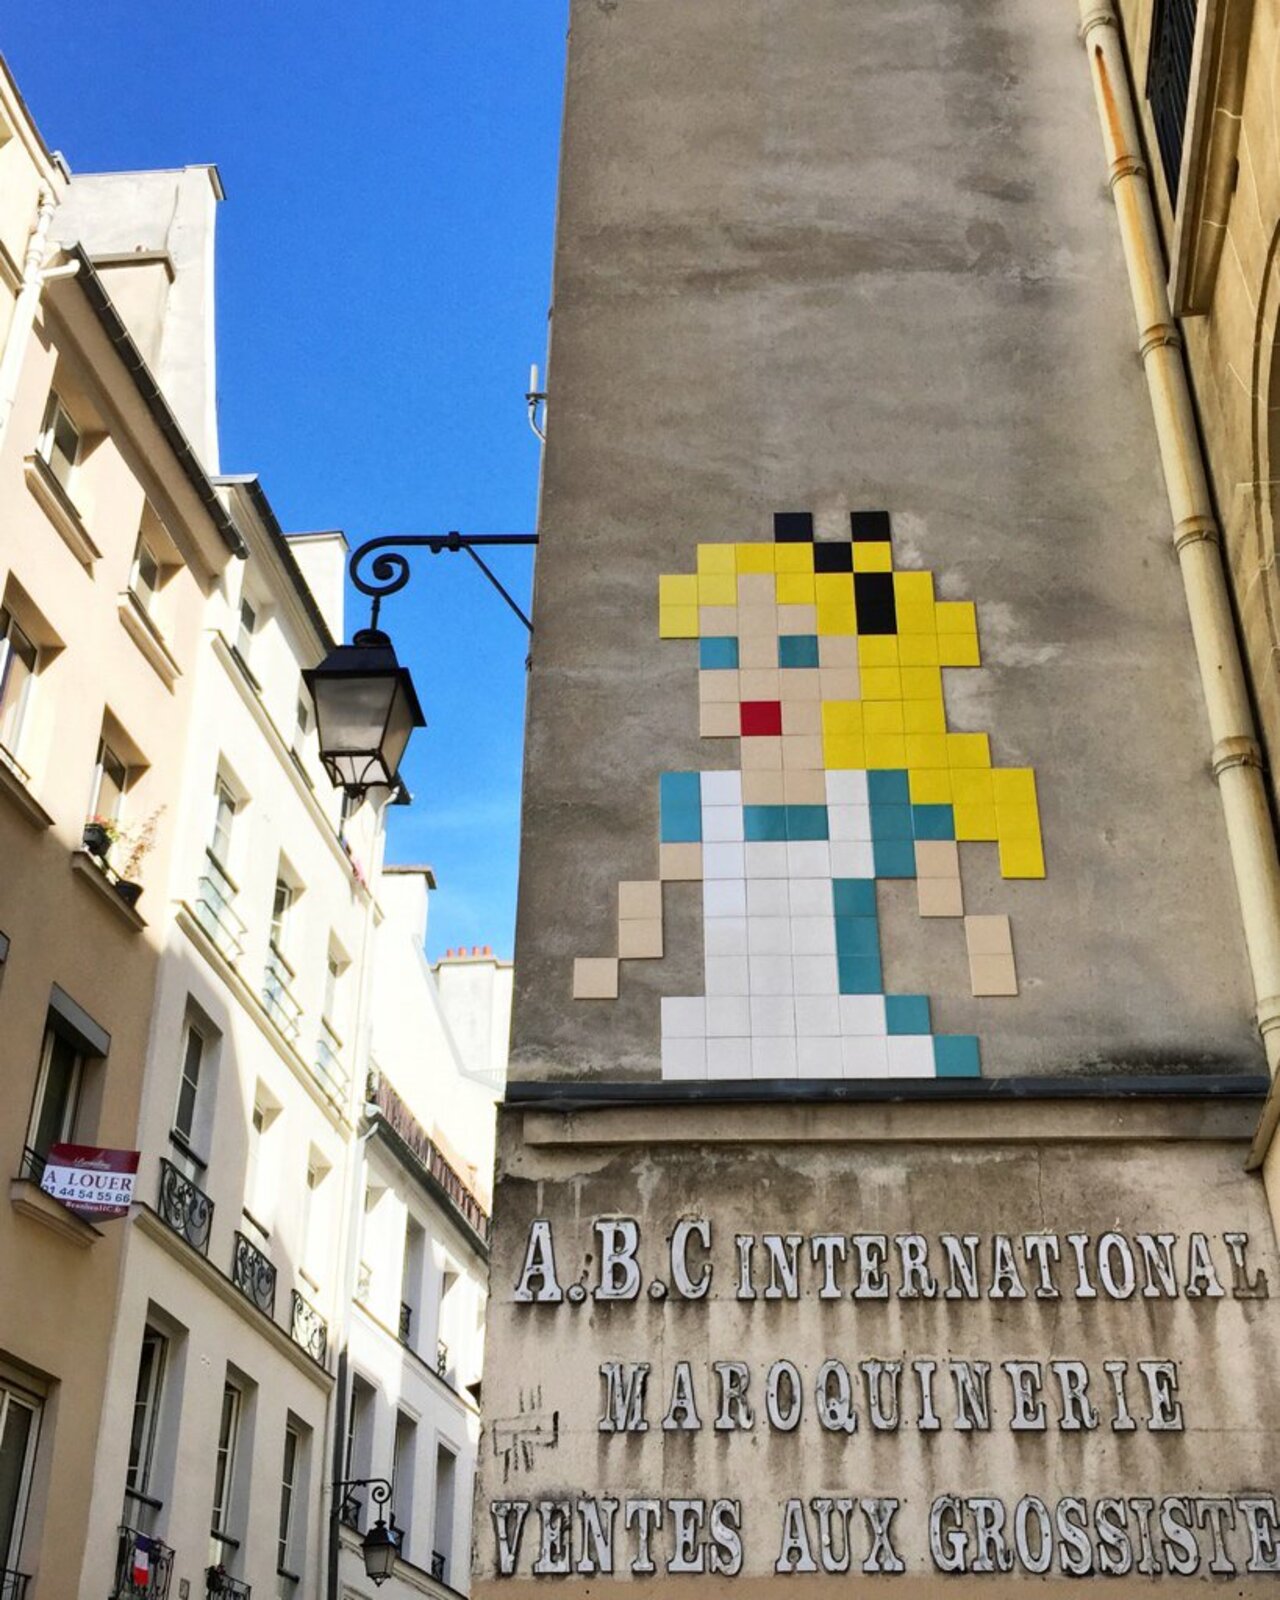 Head over to Snapchat now to follow our Invader hunt around Paris : StreetArtNews #streetart https://t.co/af8Itrnqtl